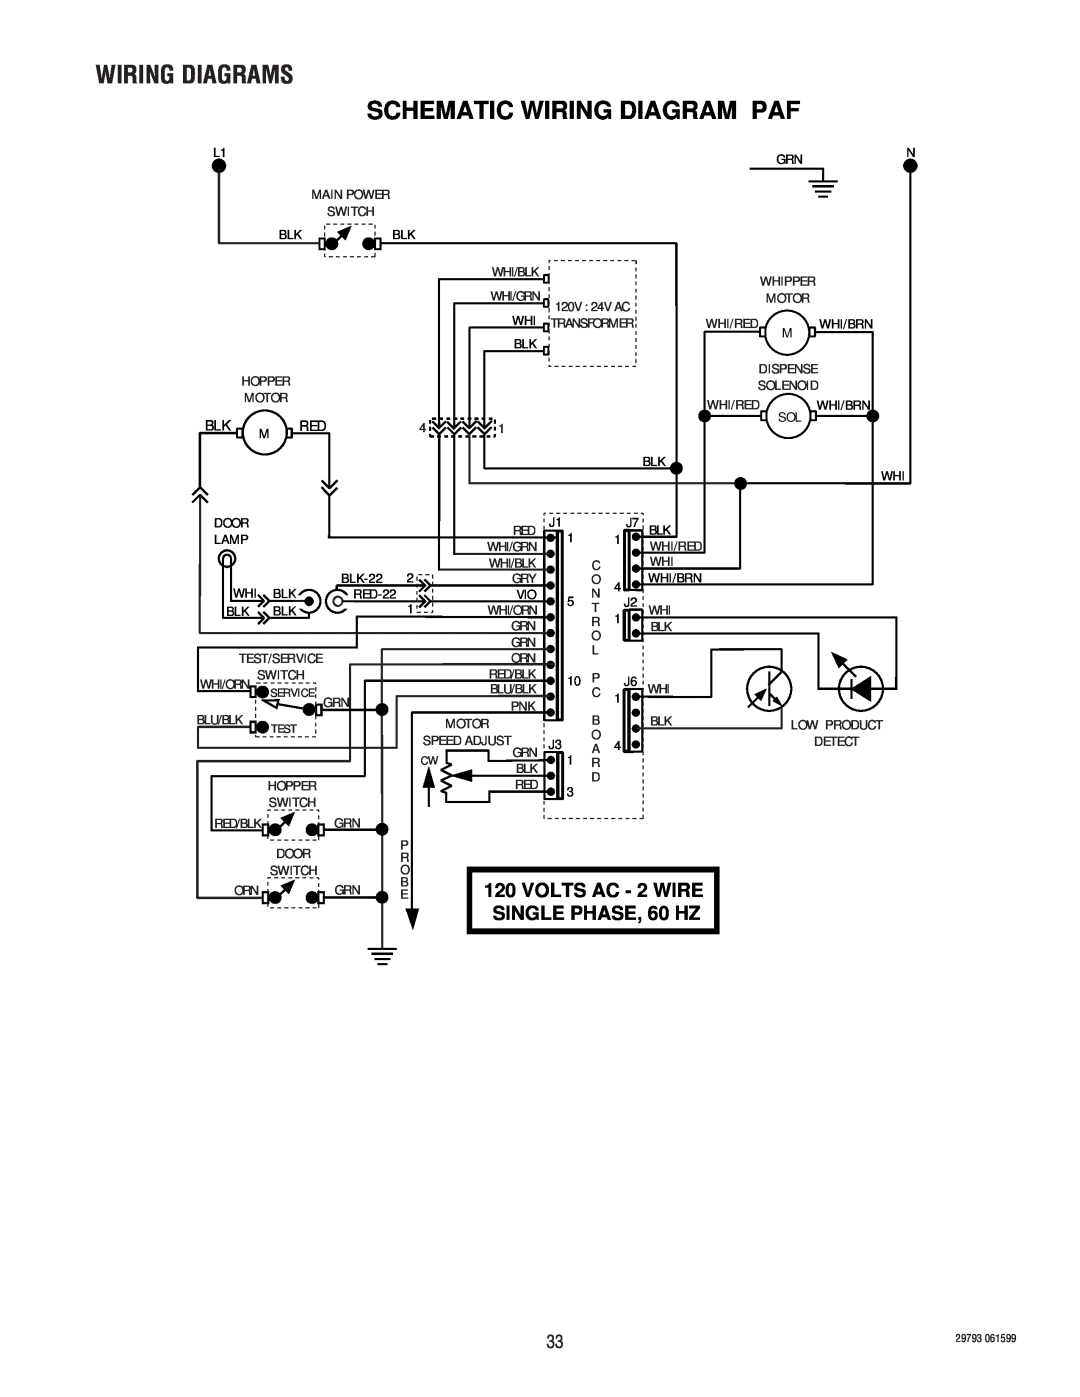 Bunn CDS-2, CDS-3 service manual Wiring Diagrams, Schematic Wiring Diagram Paf, VOLTS AC - 2 WIRE, SINGLE PHASE, 60 HZ 